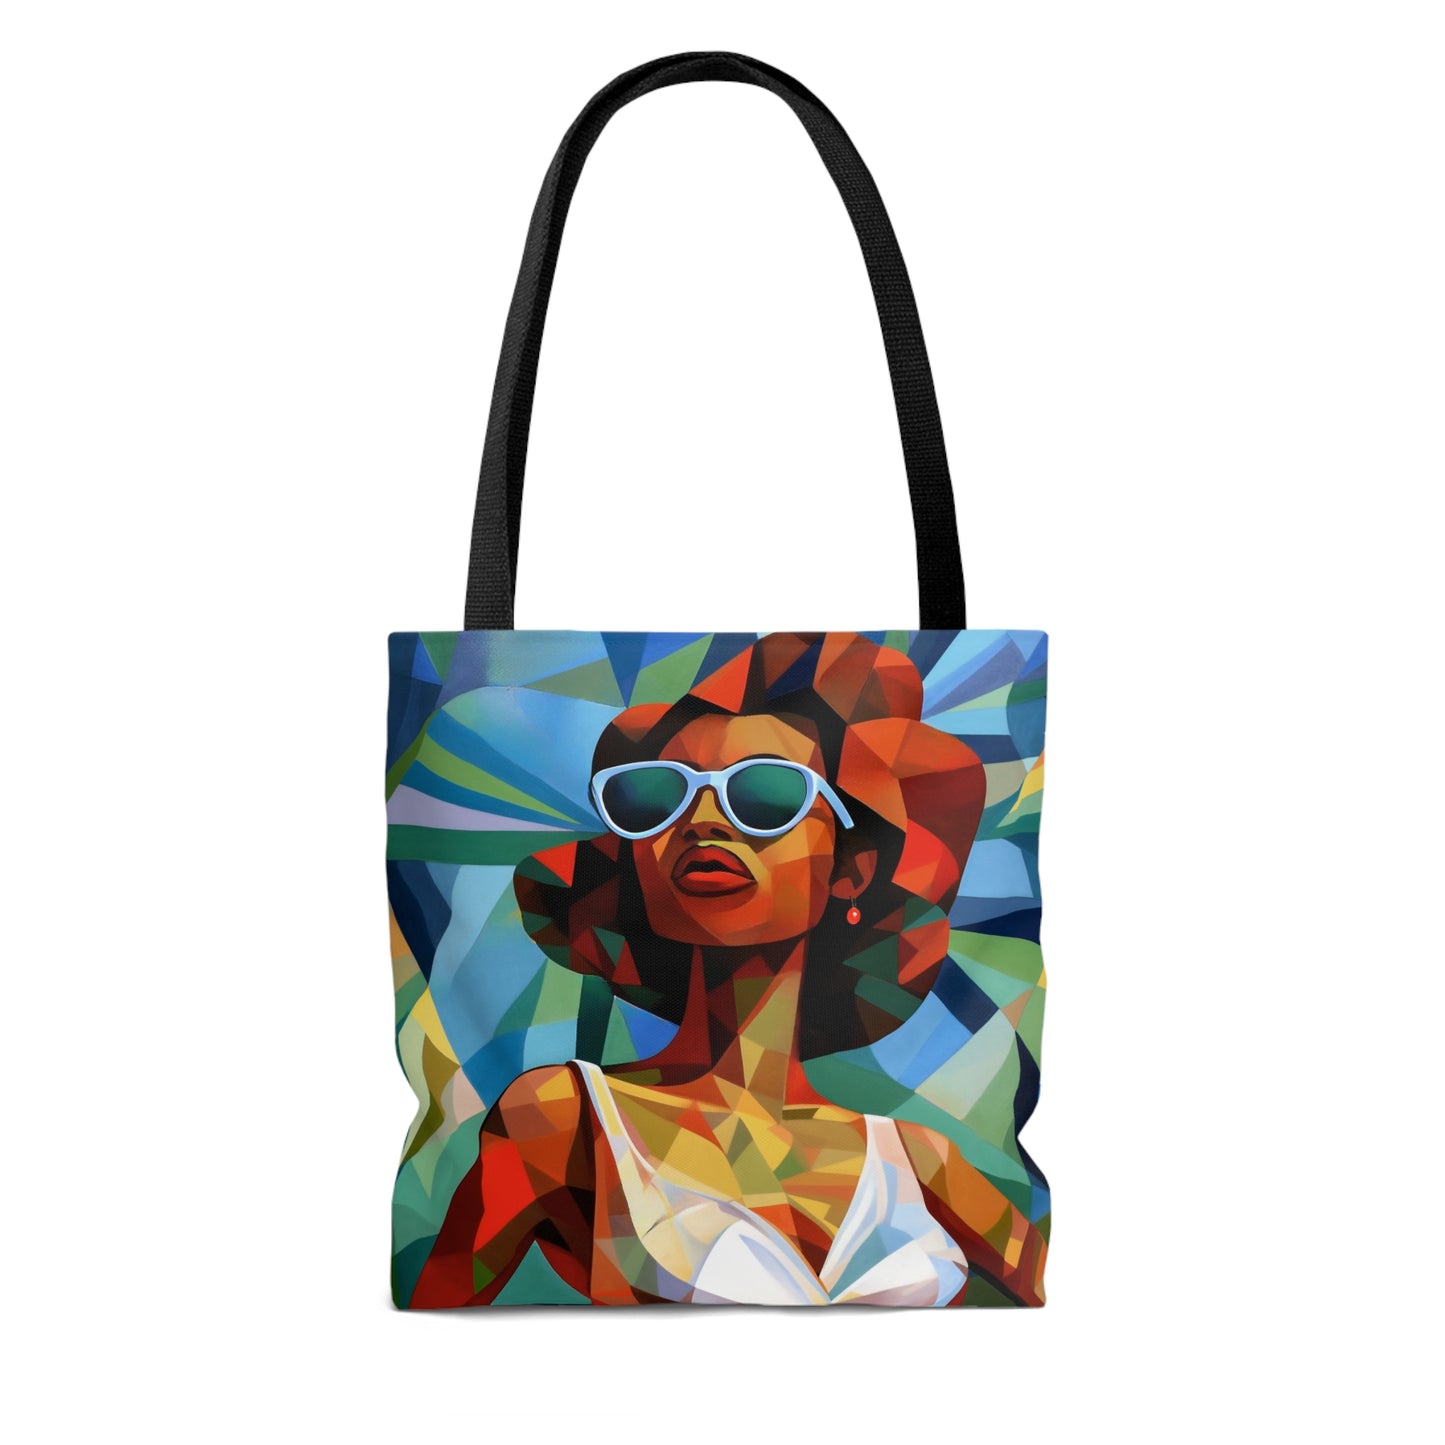 Afro Stained Glass Tote Bag